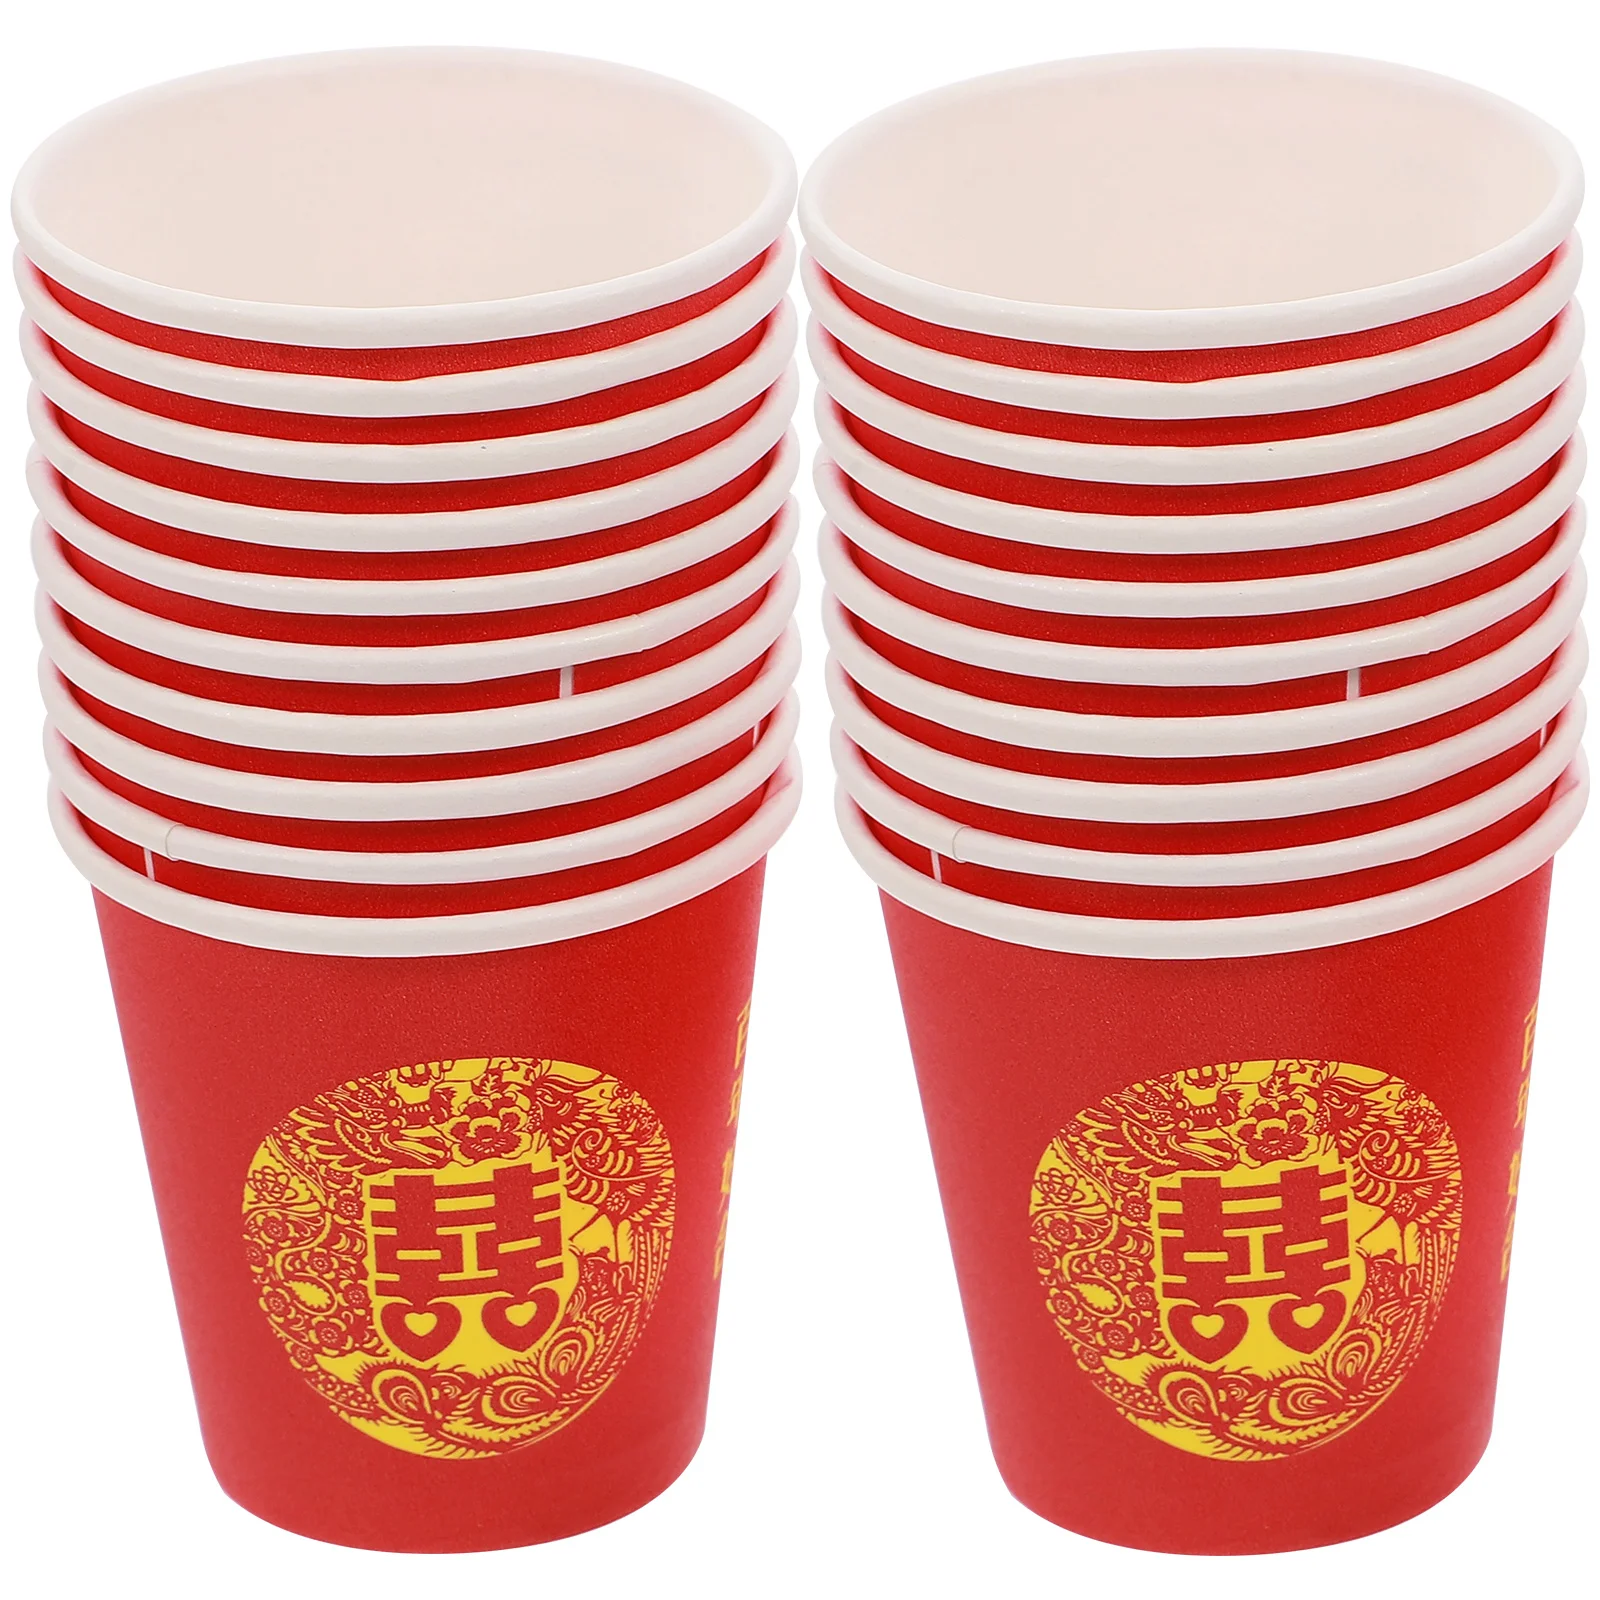 100 Pcs Disposable Glasses Red Party Cups Wedding Teacups For Chinese Drinking Paper Banquet Plates